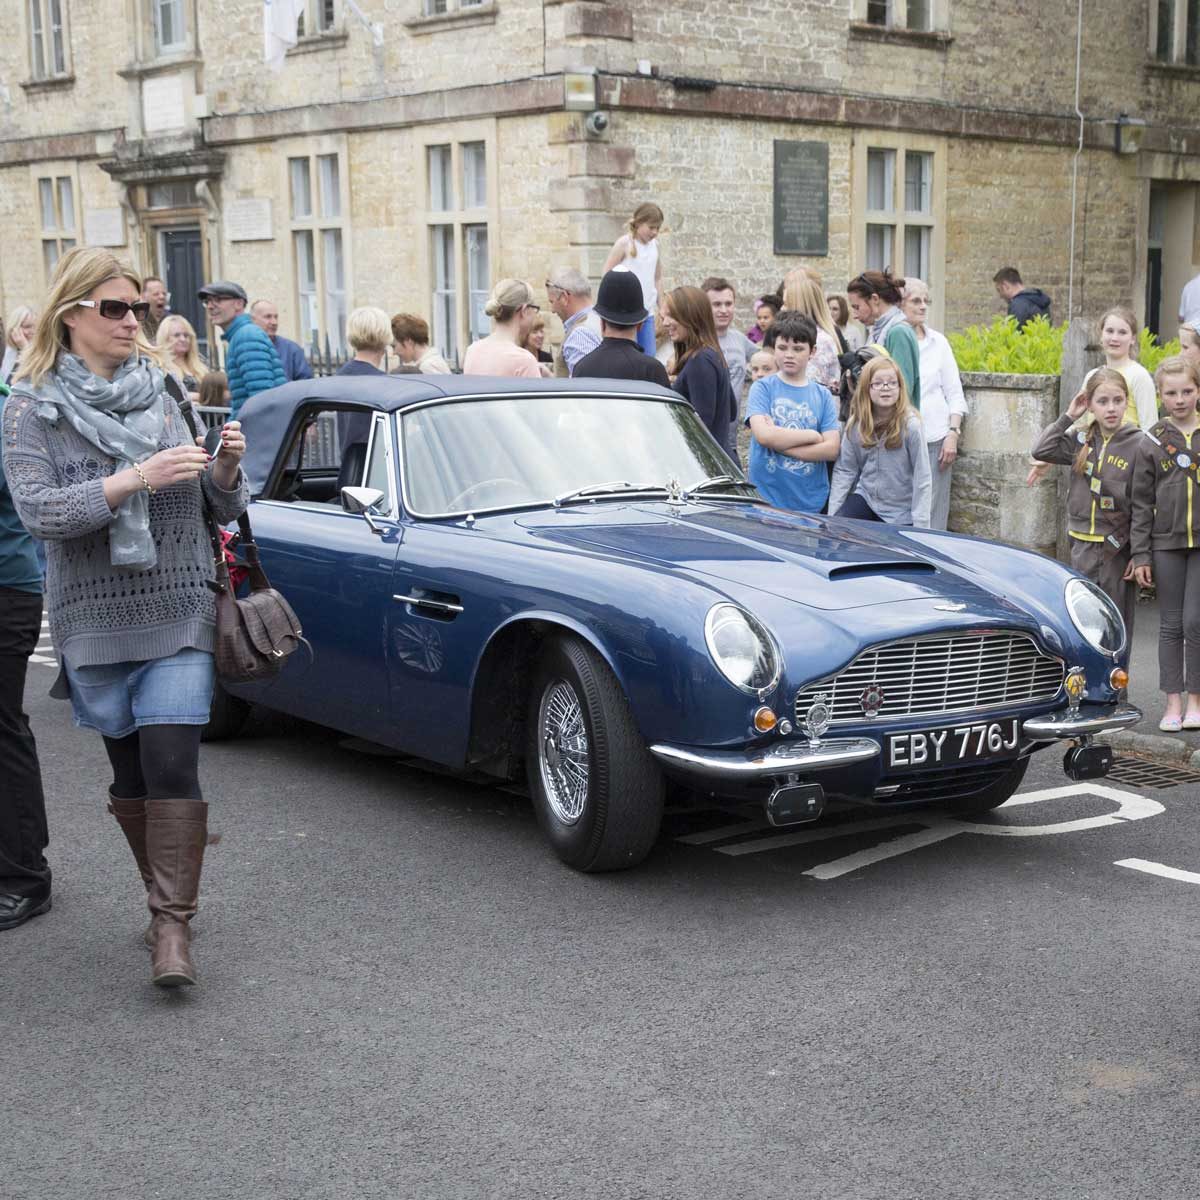 10 Royal Cars You've Got to See